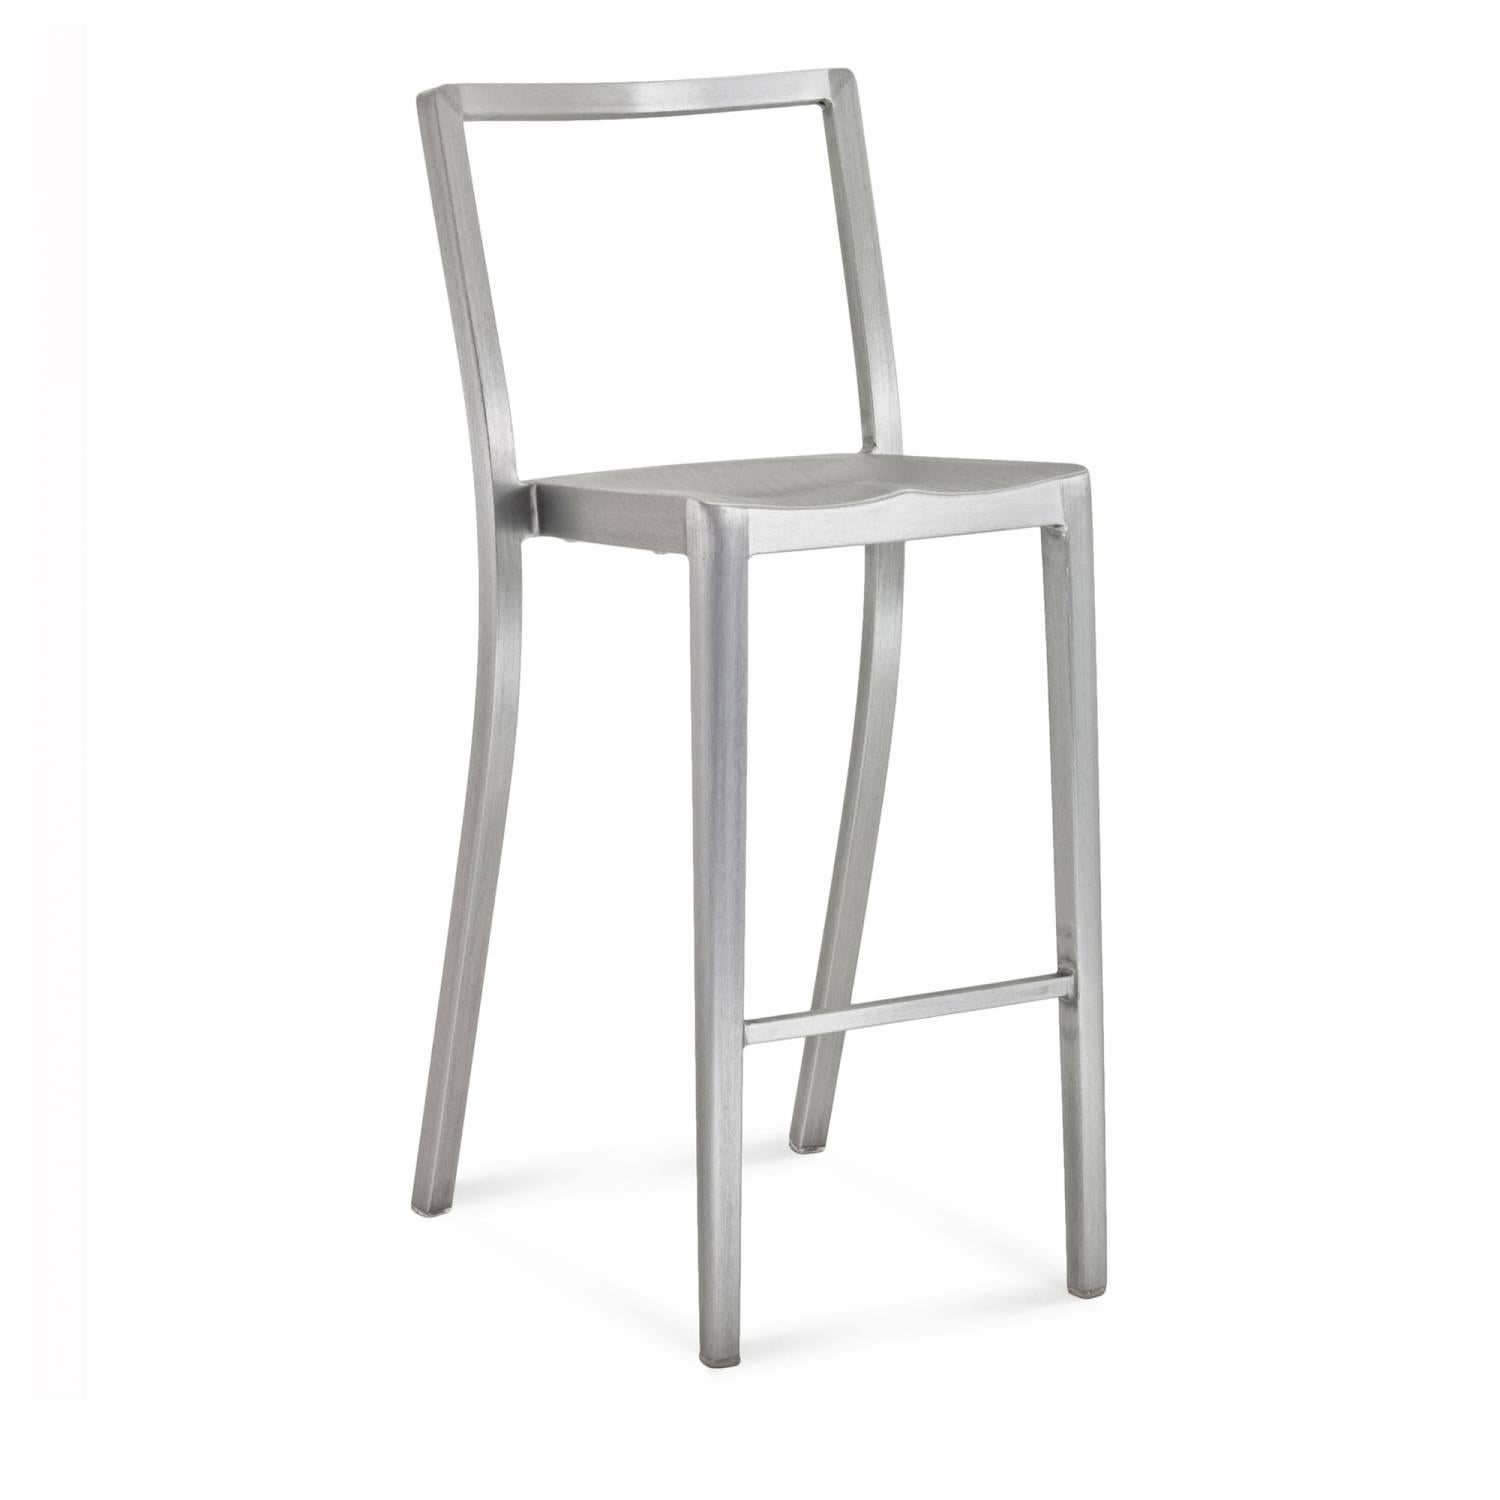 Icon is a stacking chair cousin to the famous Starck designed Hudson chair. It has been used in hotels, bars and restaurants worldwide, as well as training centres, meeting areas and schools. Starck describes Icon as “the chair I see when I close my